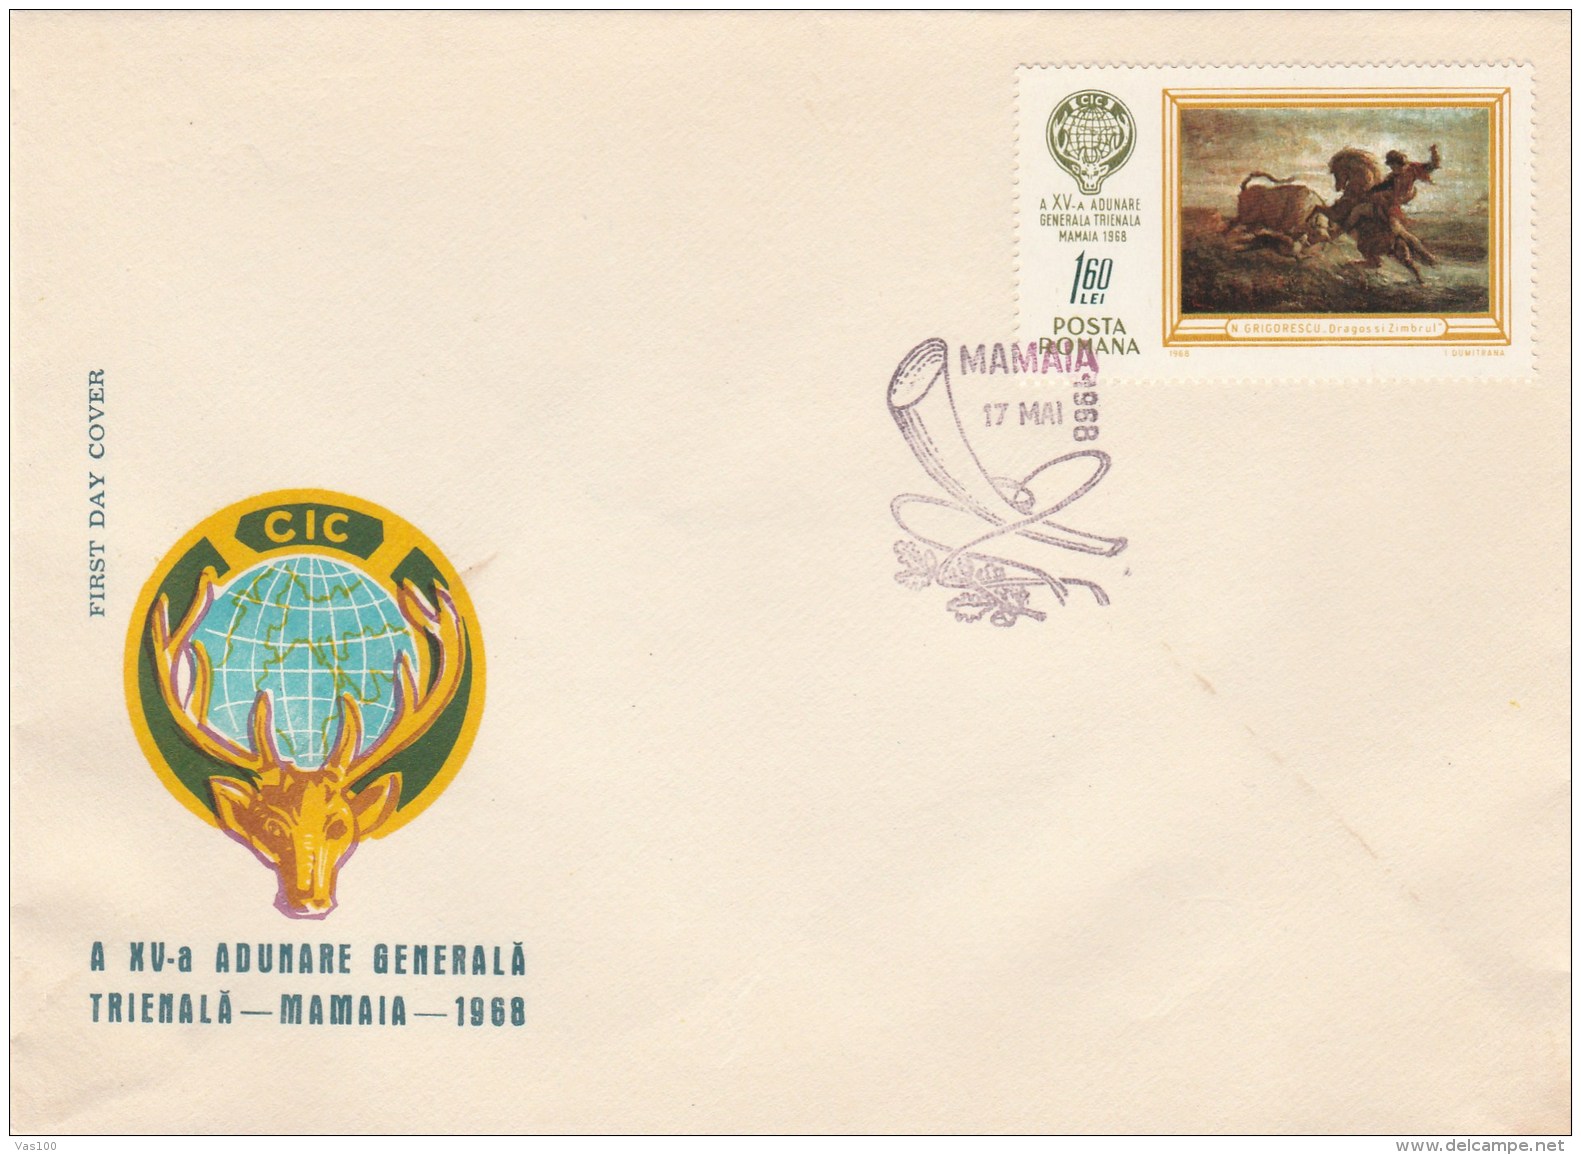 #BV3586  CIC, TRIENNIAL GENERAL ASSEMBLY, MAMAIA, STAG, DEER, COVERS FDC, 1968, ROMANIA. - FDC